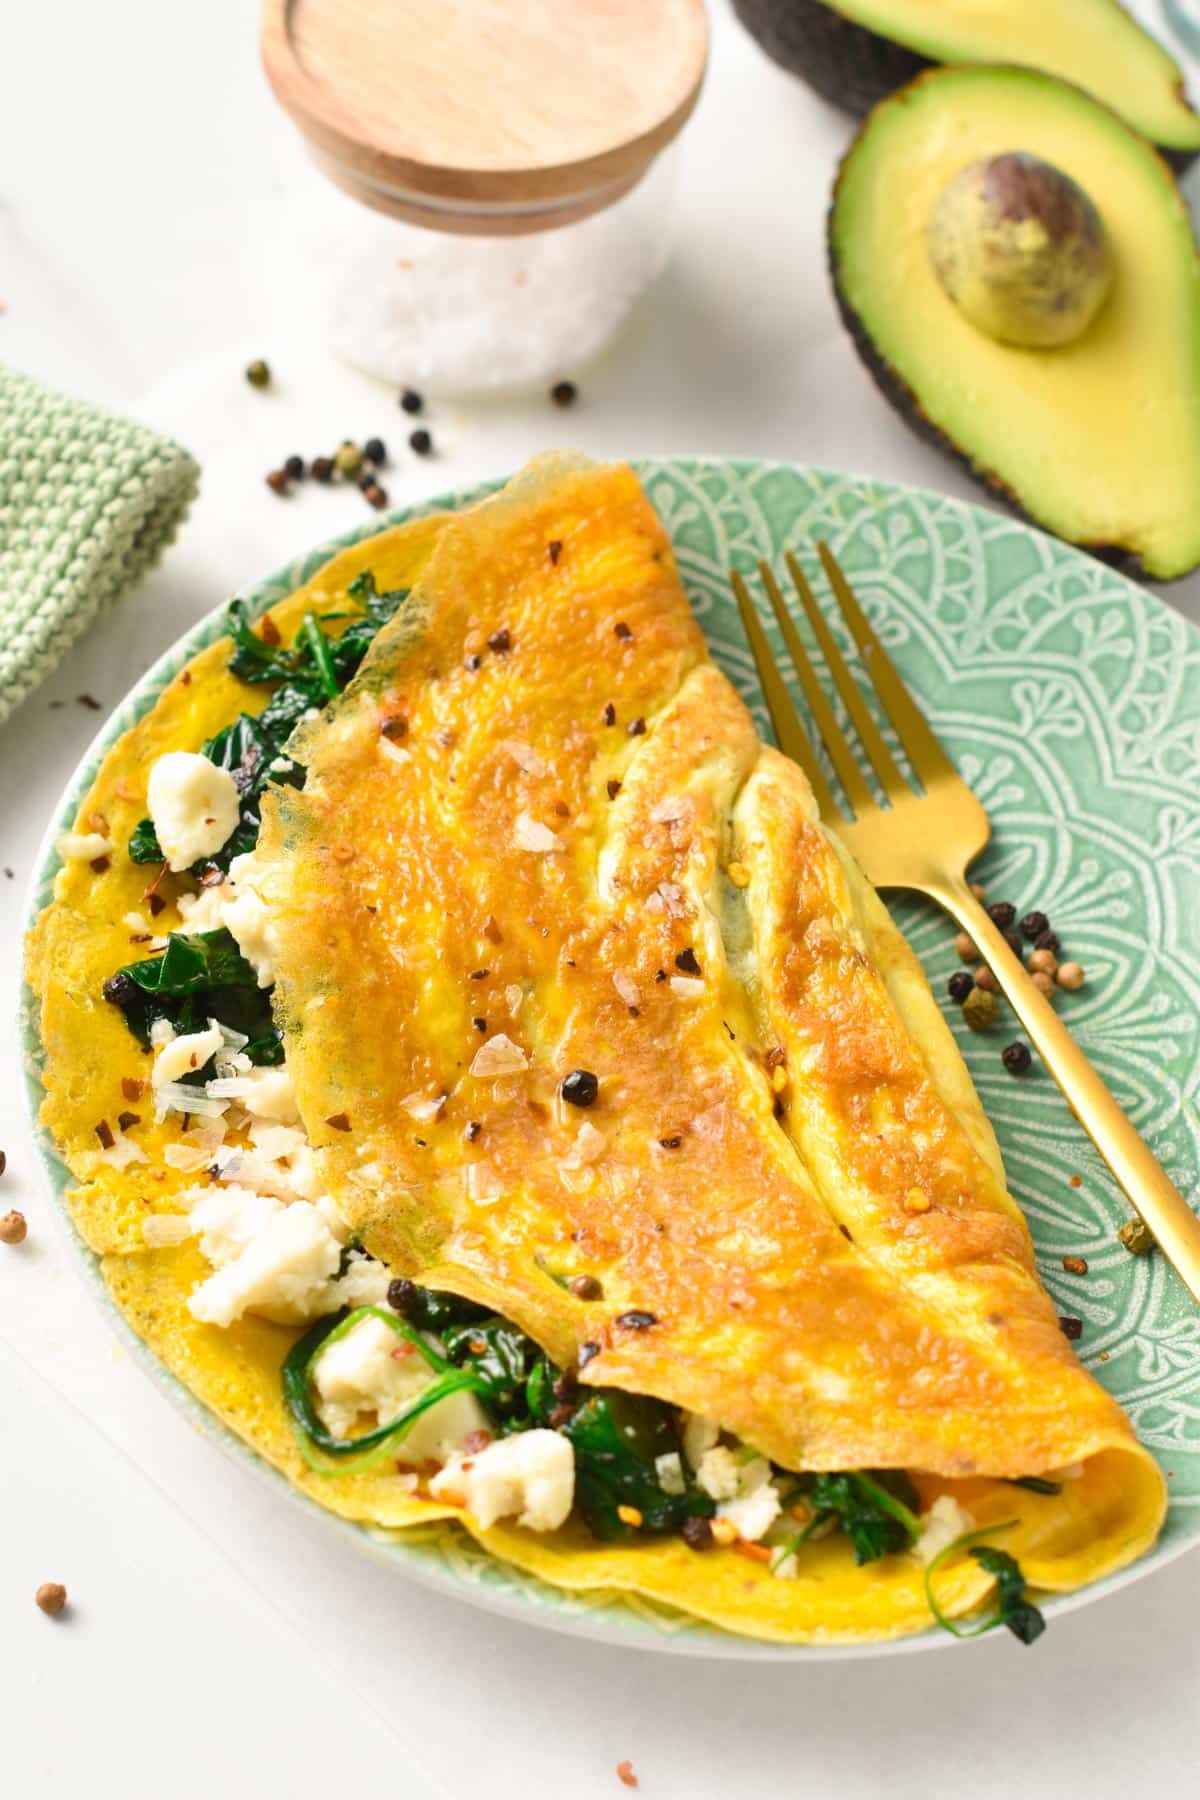 A green plate with a feta spinach omelette on it and a golden fork on the right side.